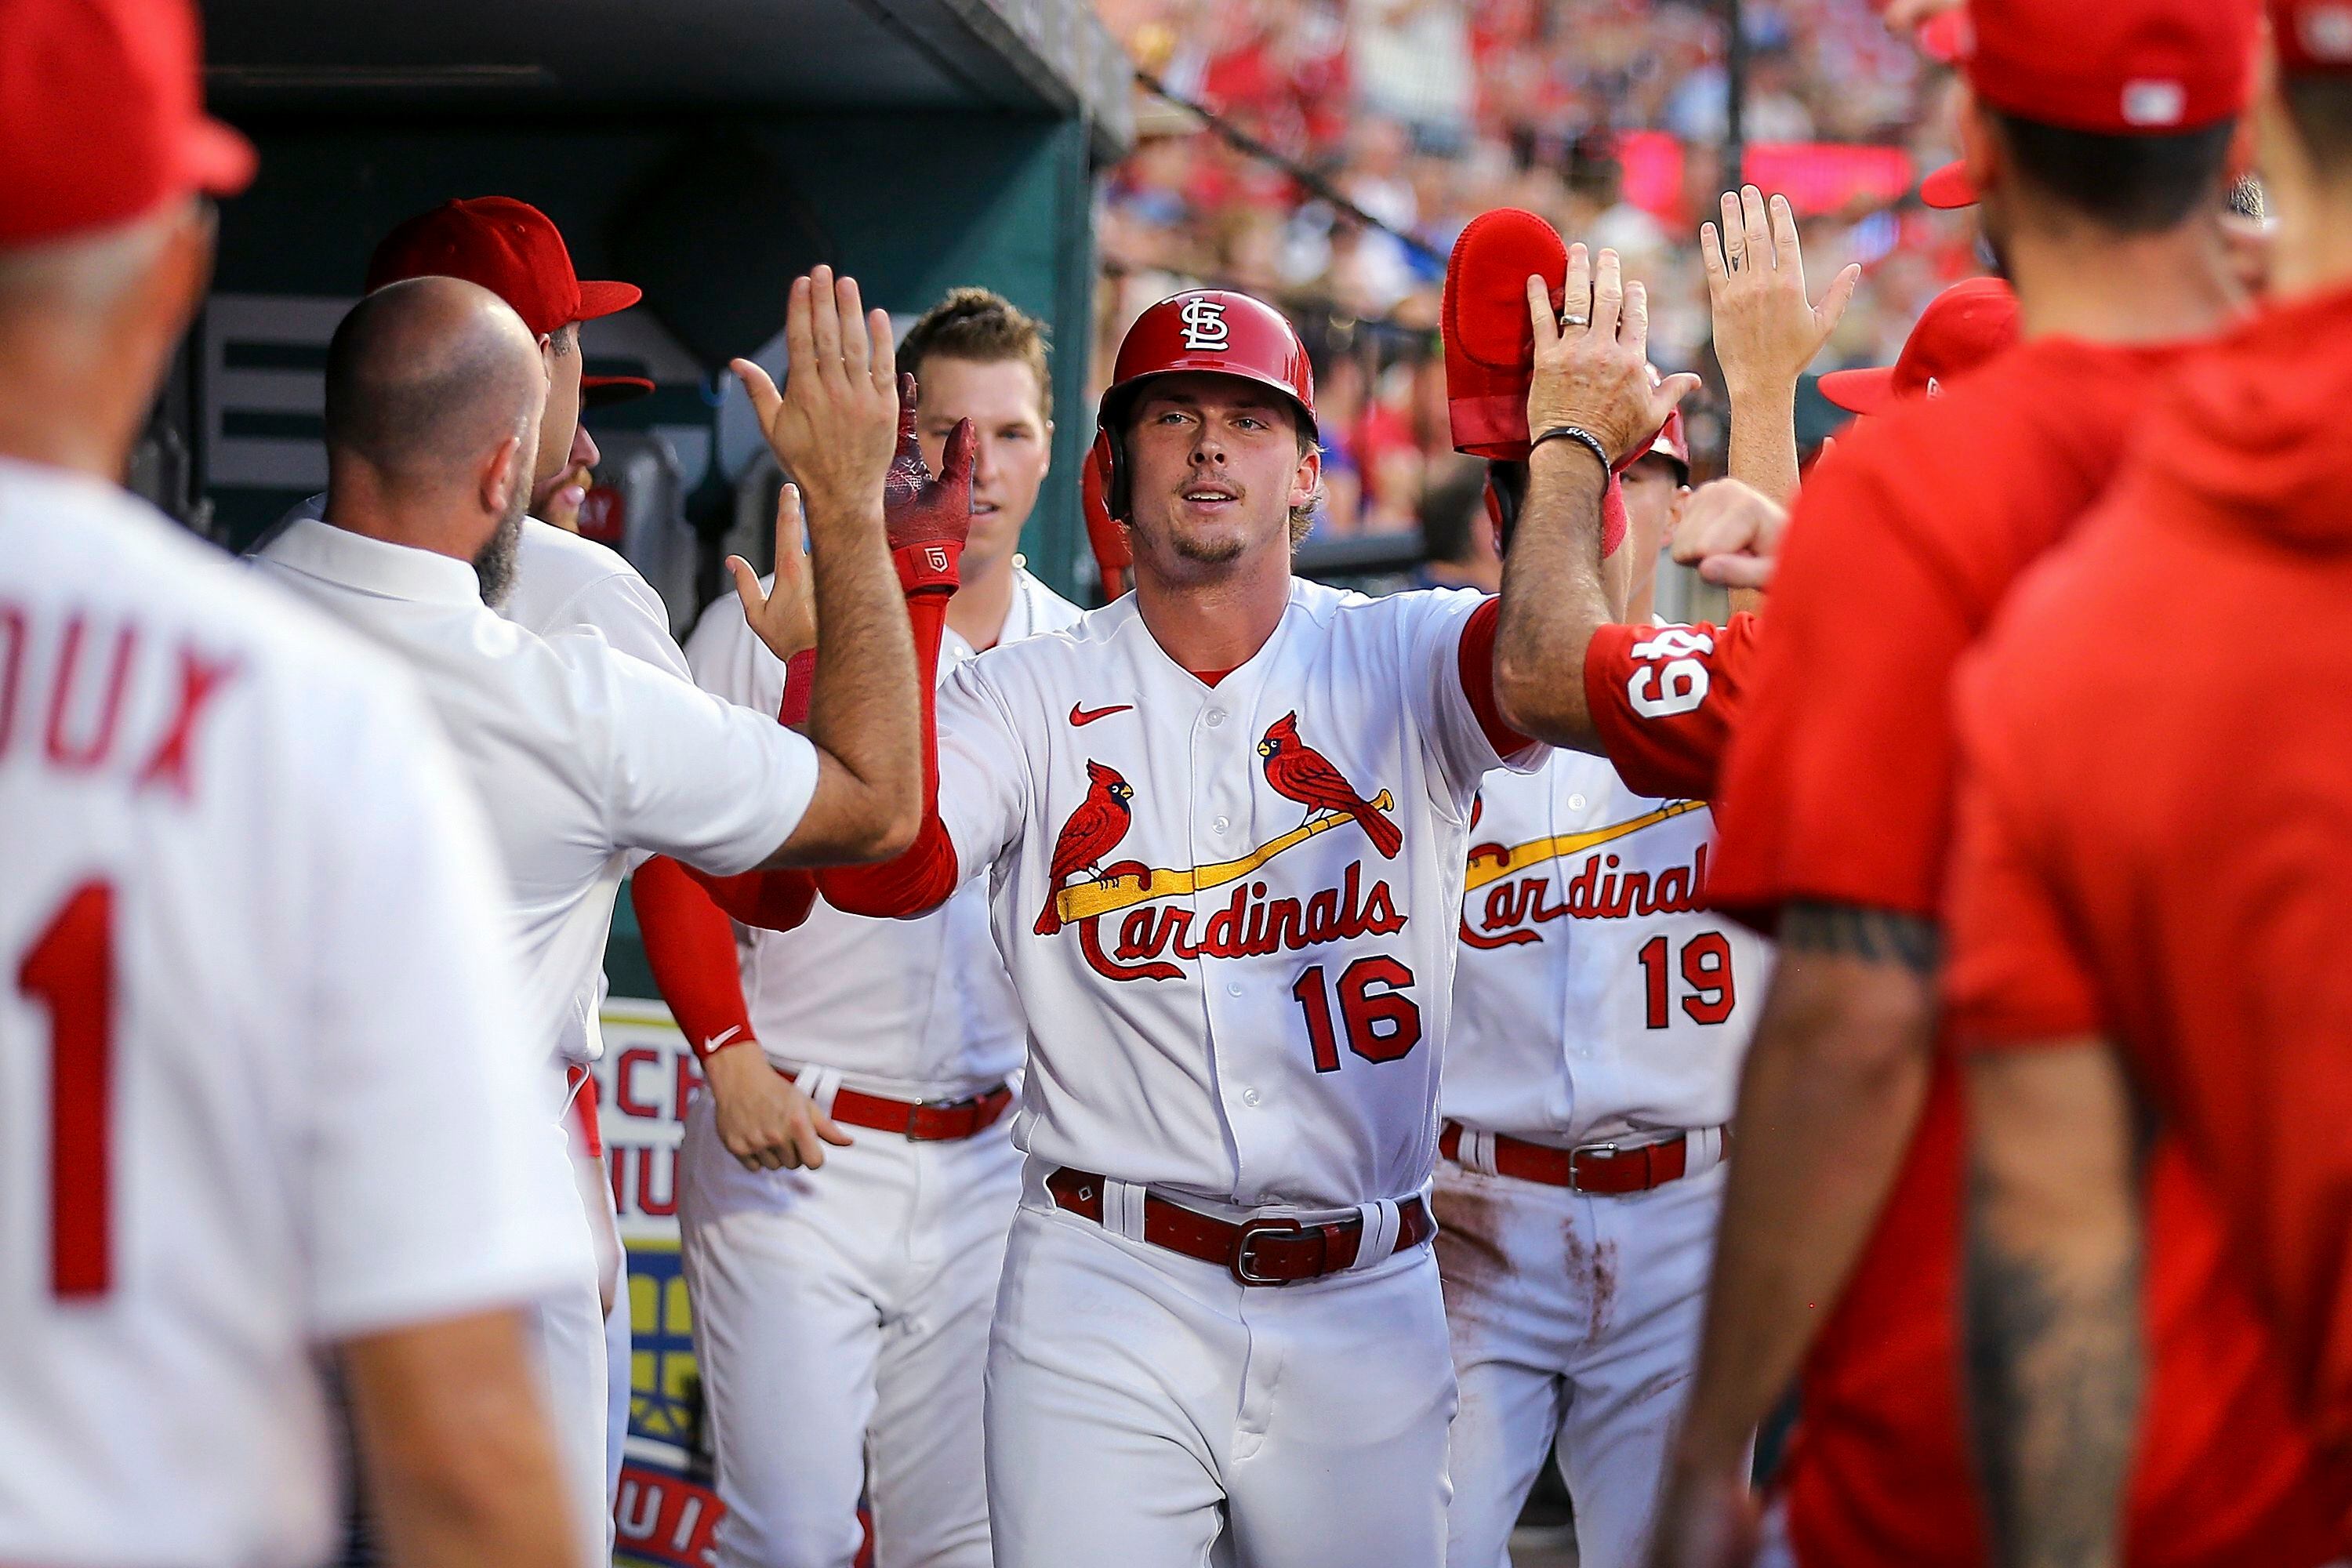 Cardinals trounced by Astros, 14-0, as Adam Wainwright gives up six runs, National Sports